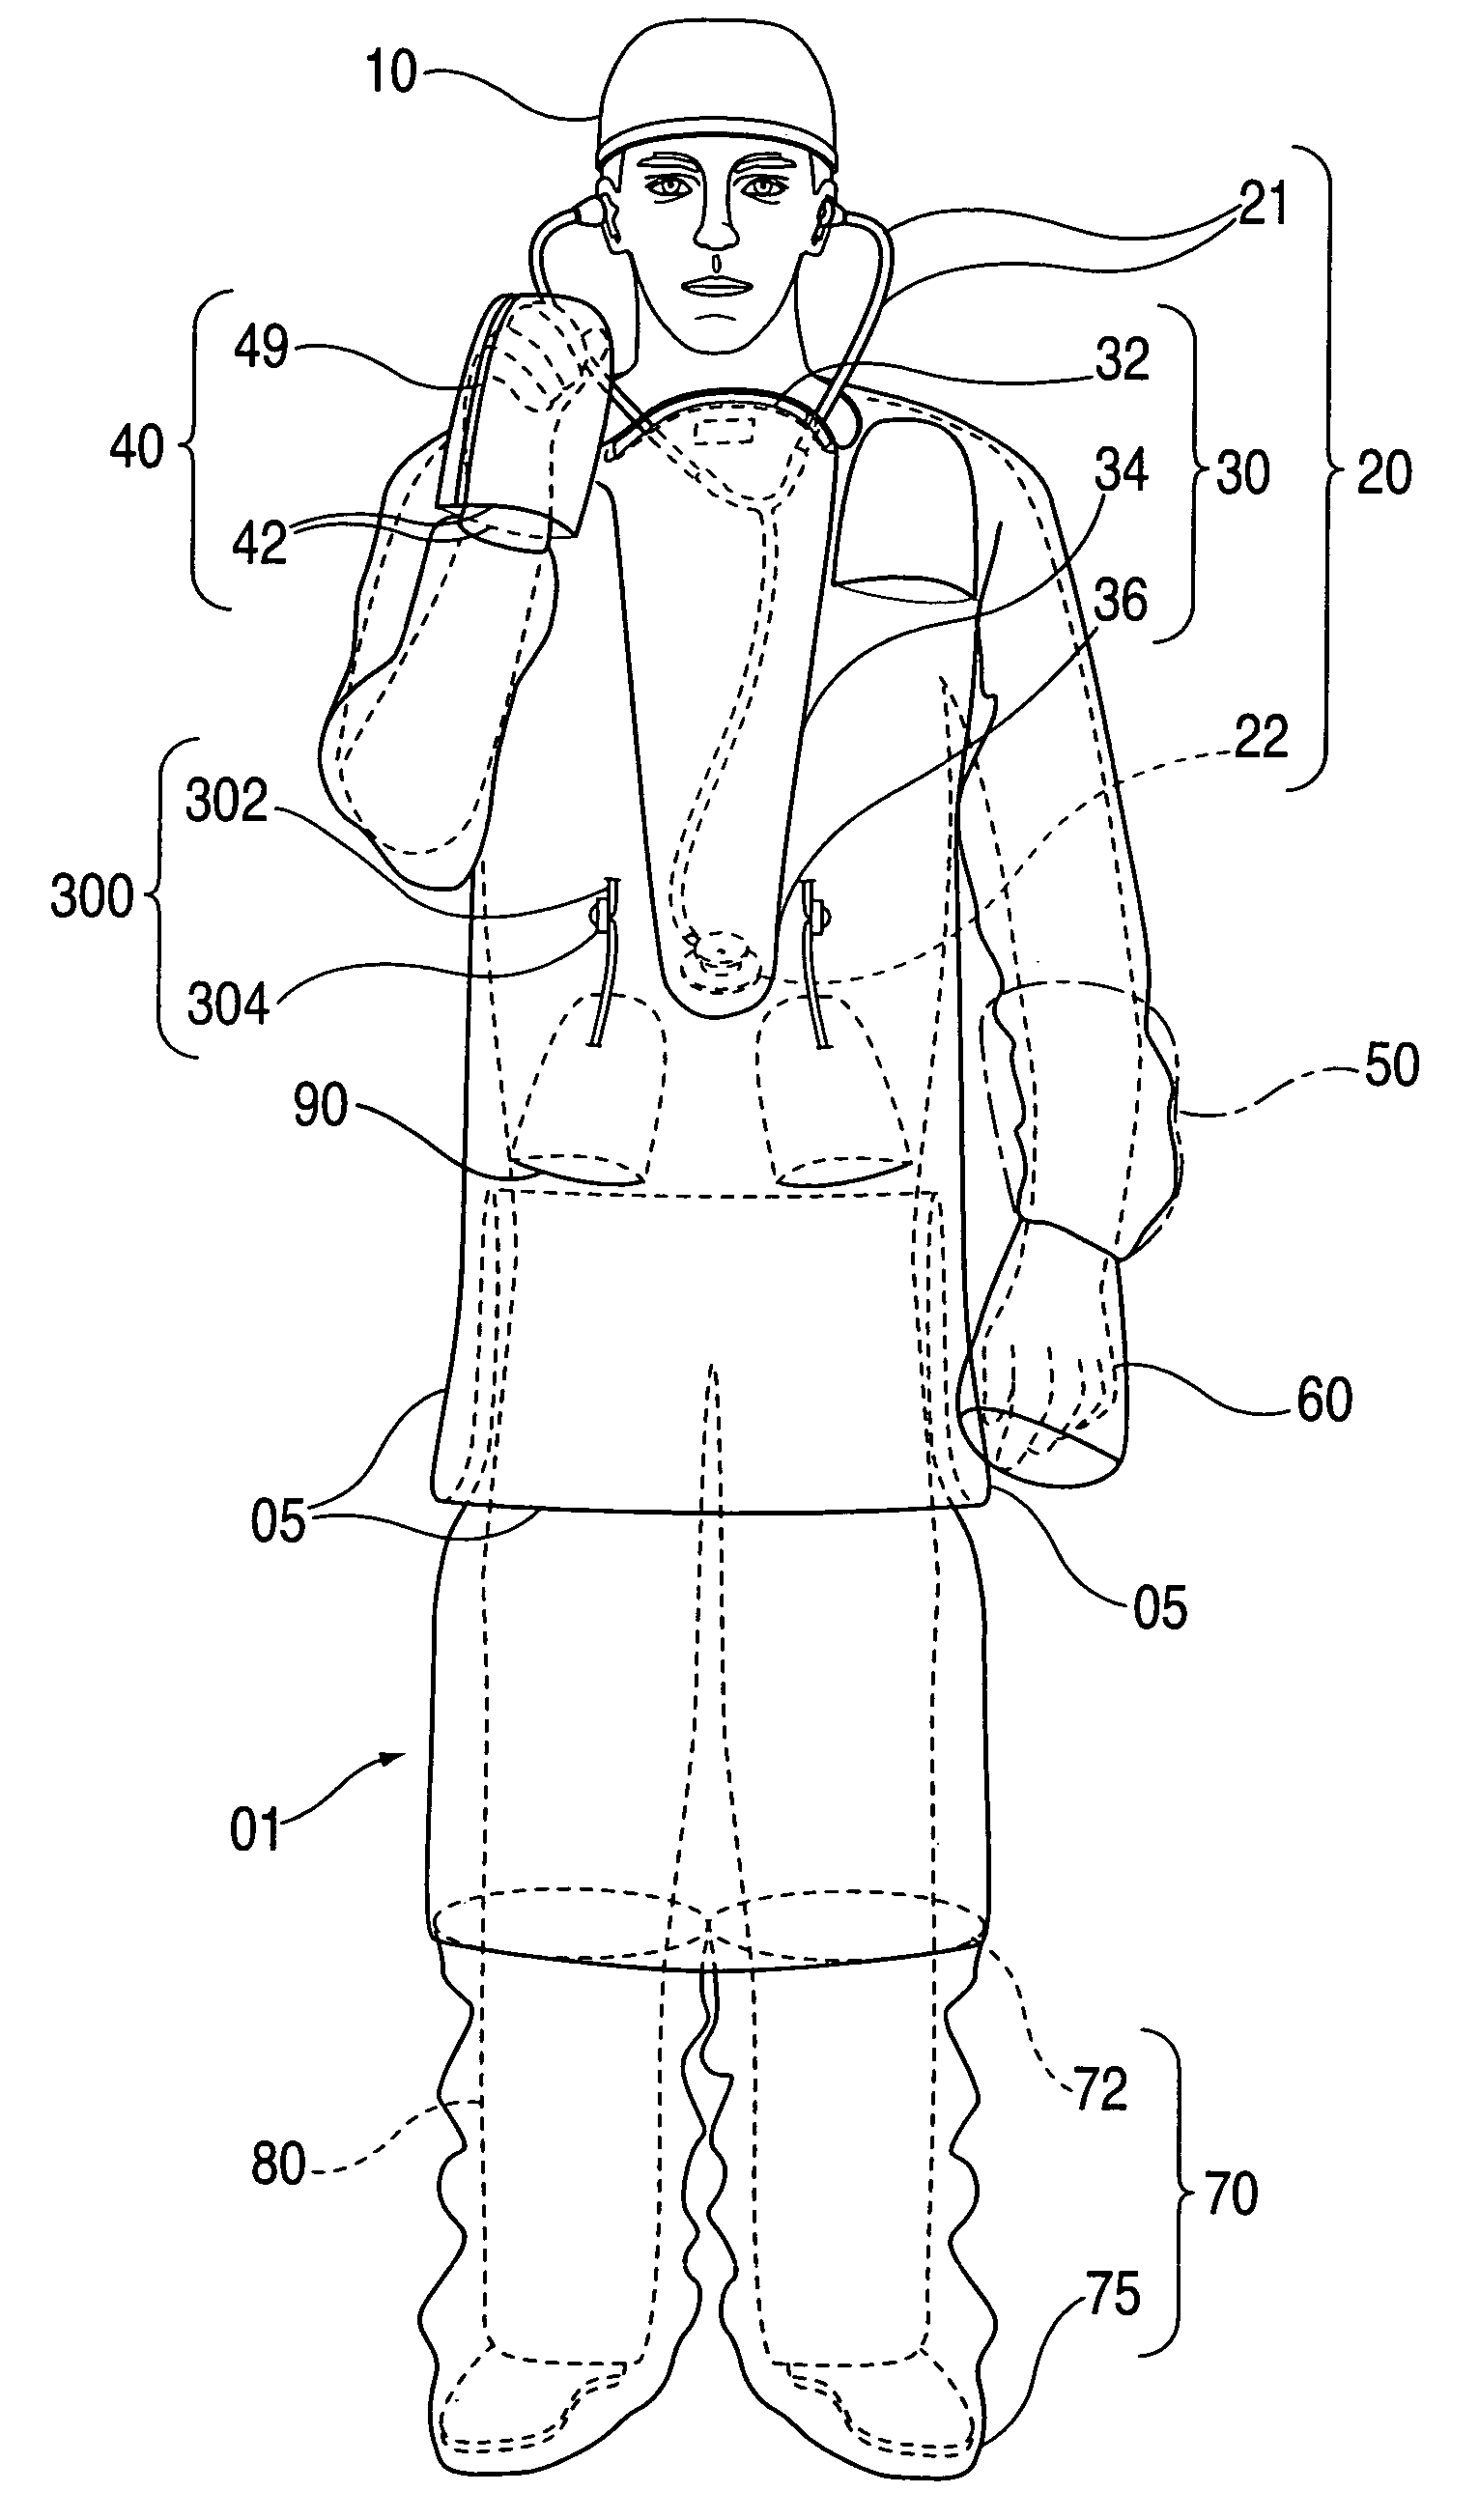 Advanced isolation gown